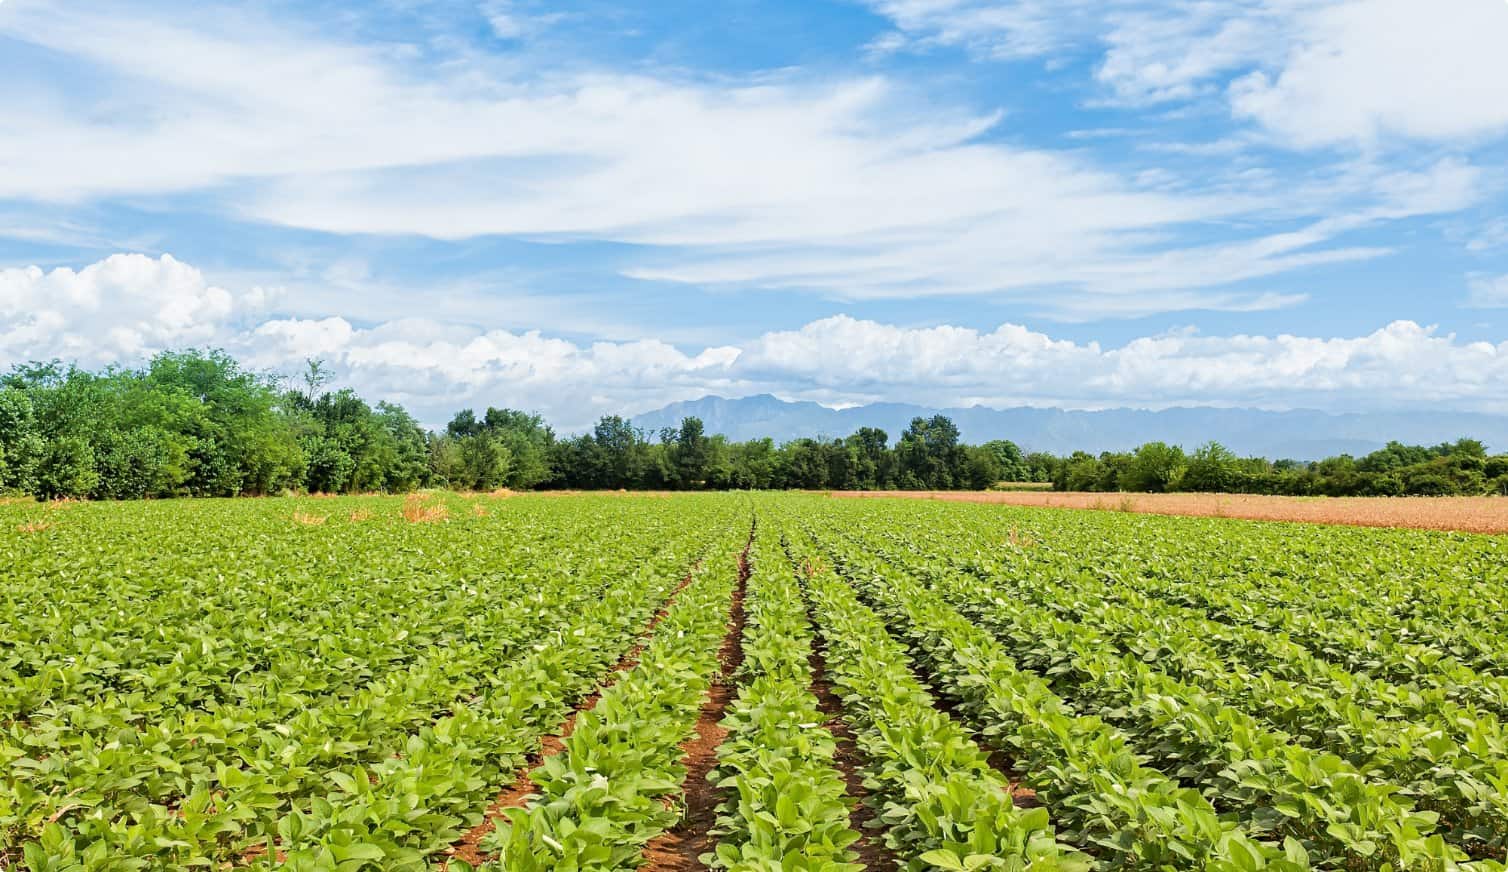 A field of crops with a blue sky in the background.